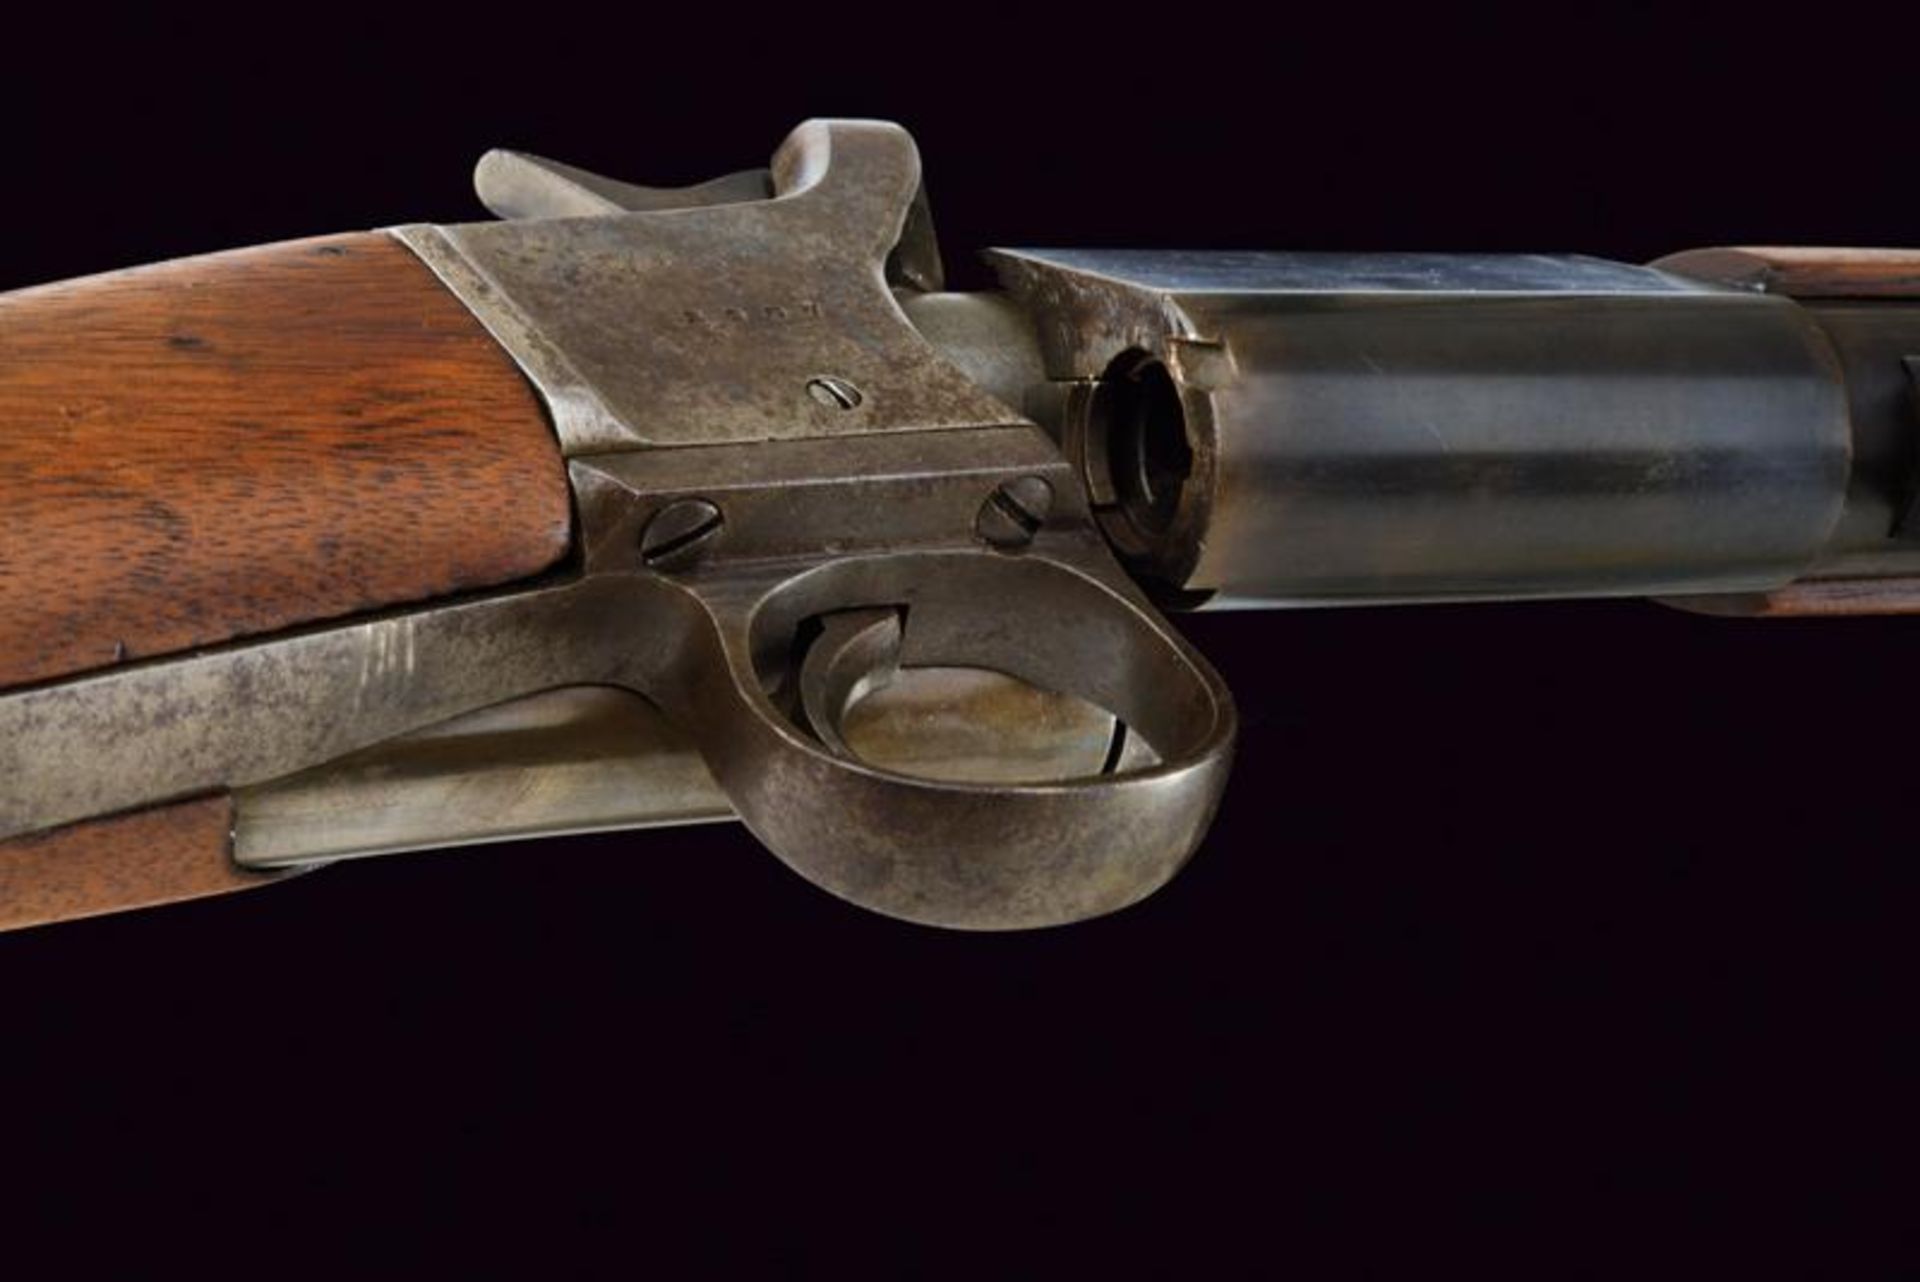 A rare Triplett & Scott Repeating Carbine by Meriden - Image 11 of 11